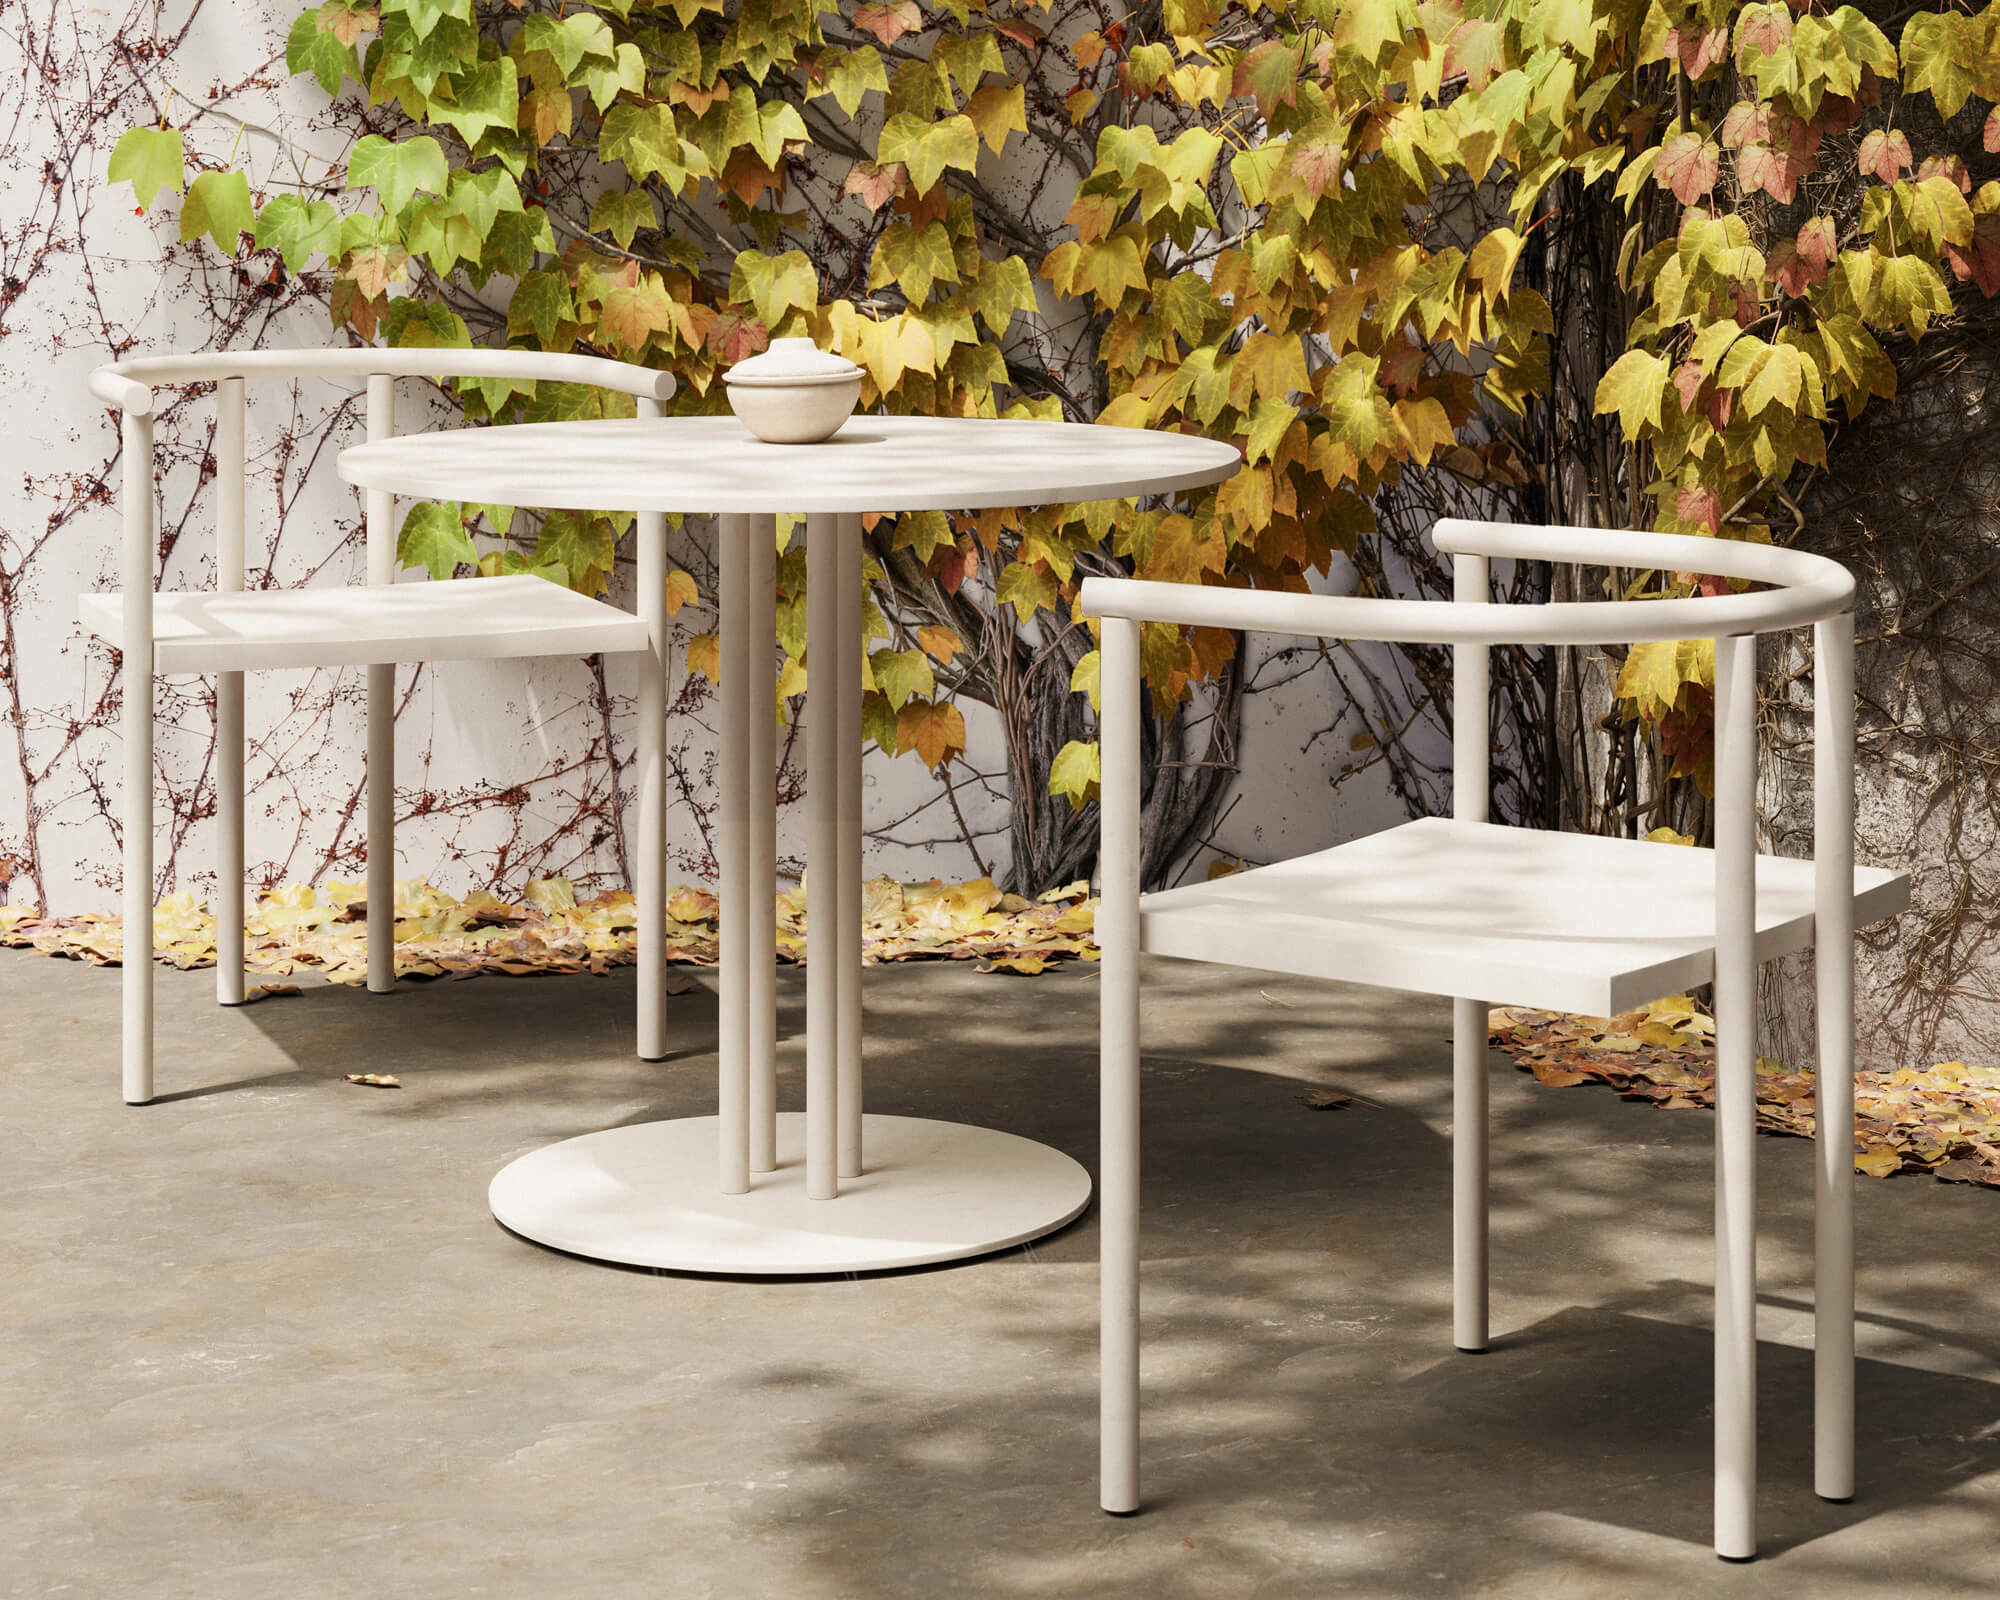 kettal ringer outdoor dining chairs